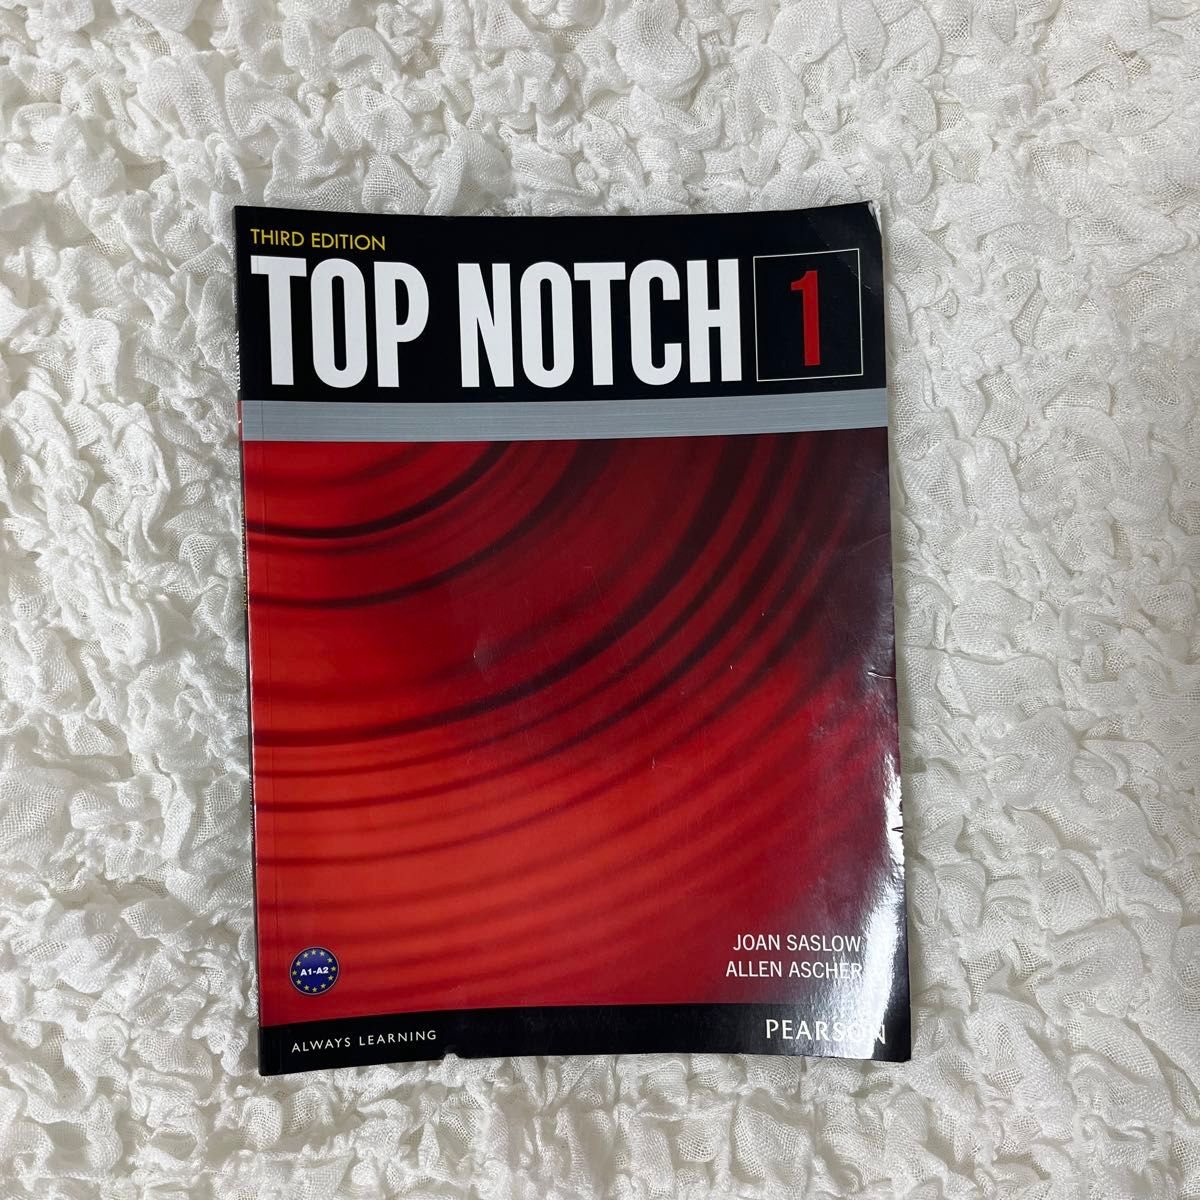 THIRD EDITION TOP NOTCH 1 the leader in global communication 